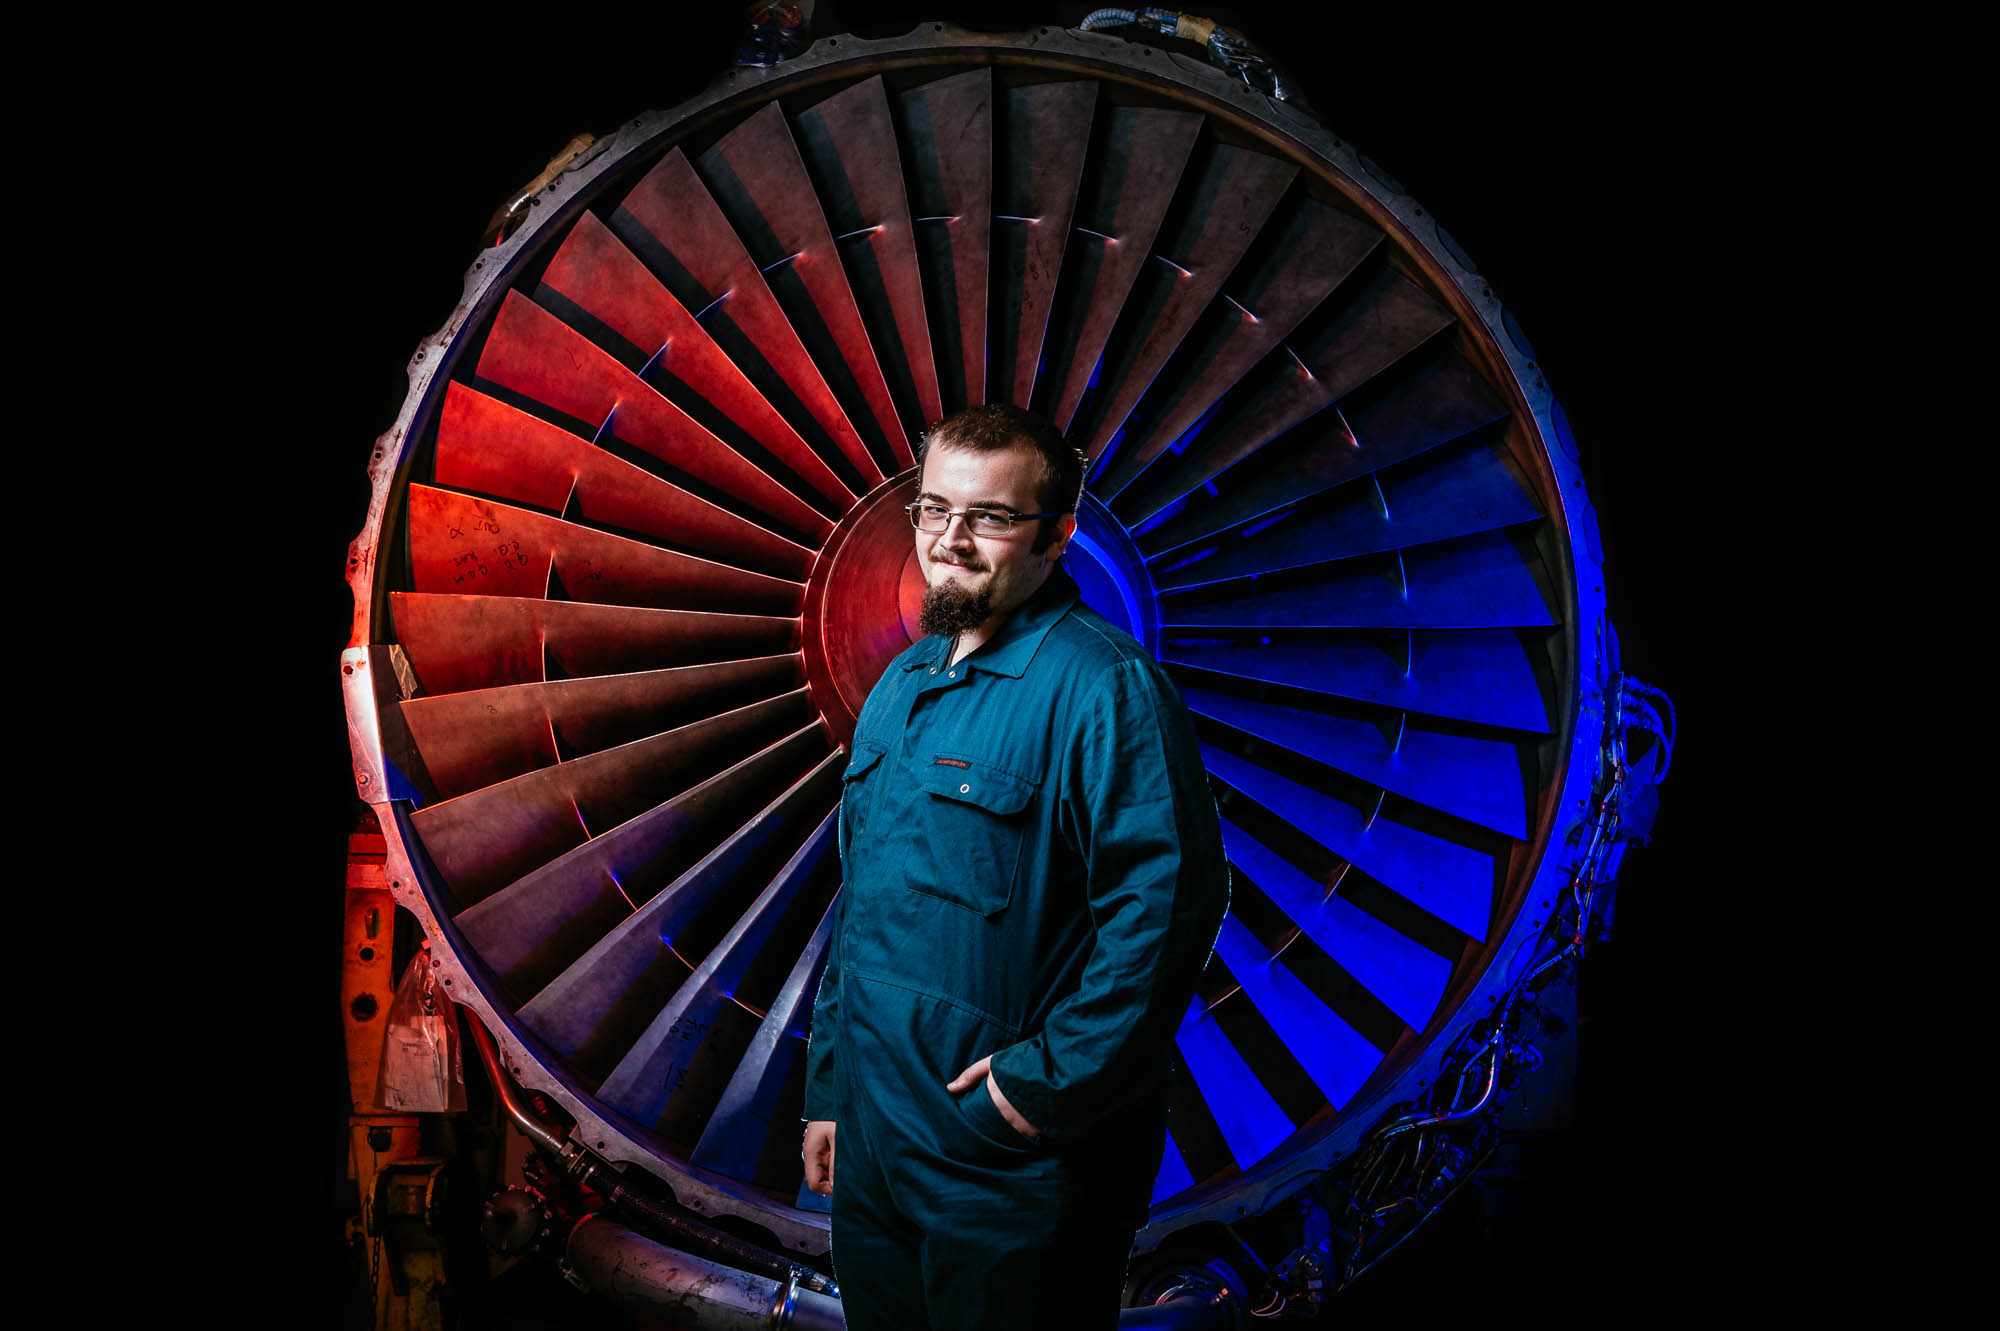 A photo of an engineering student standing in front of a jet propeller